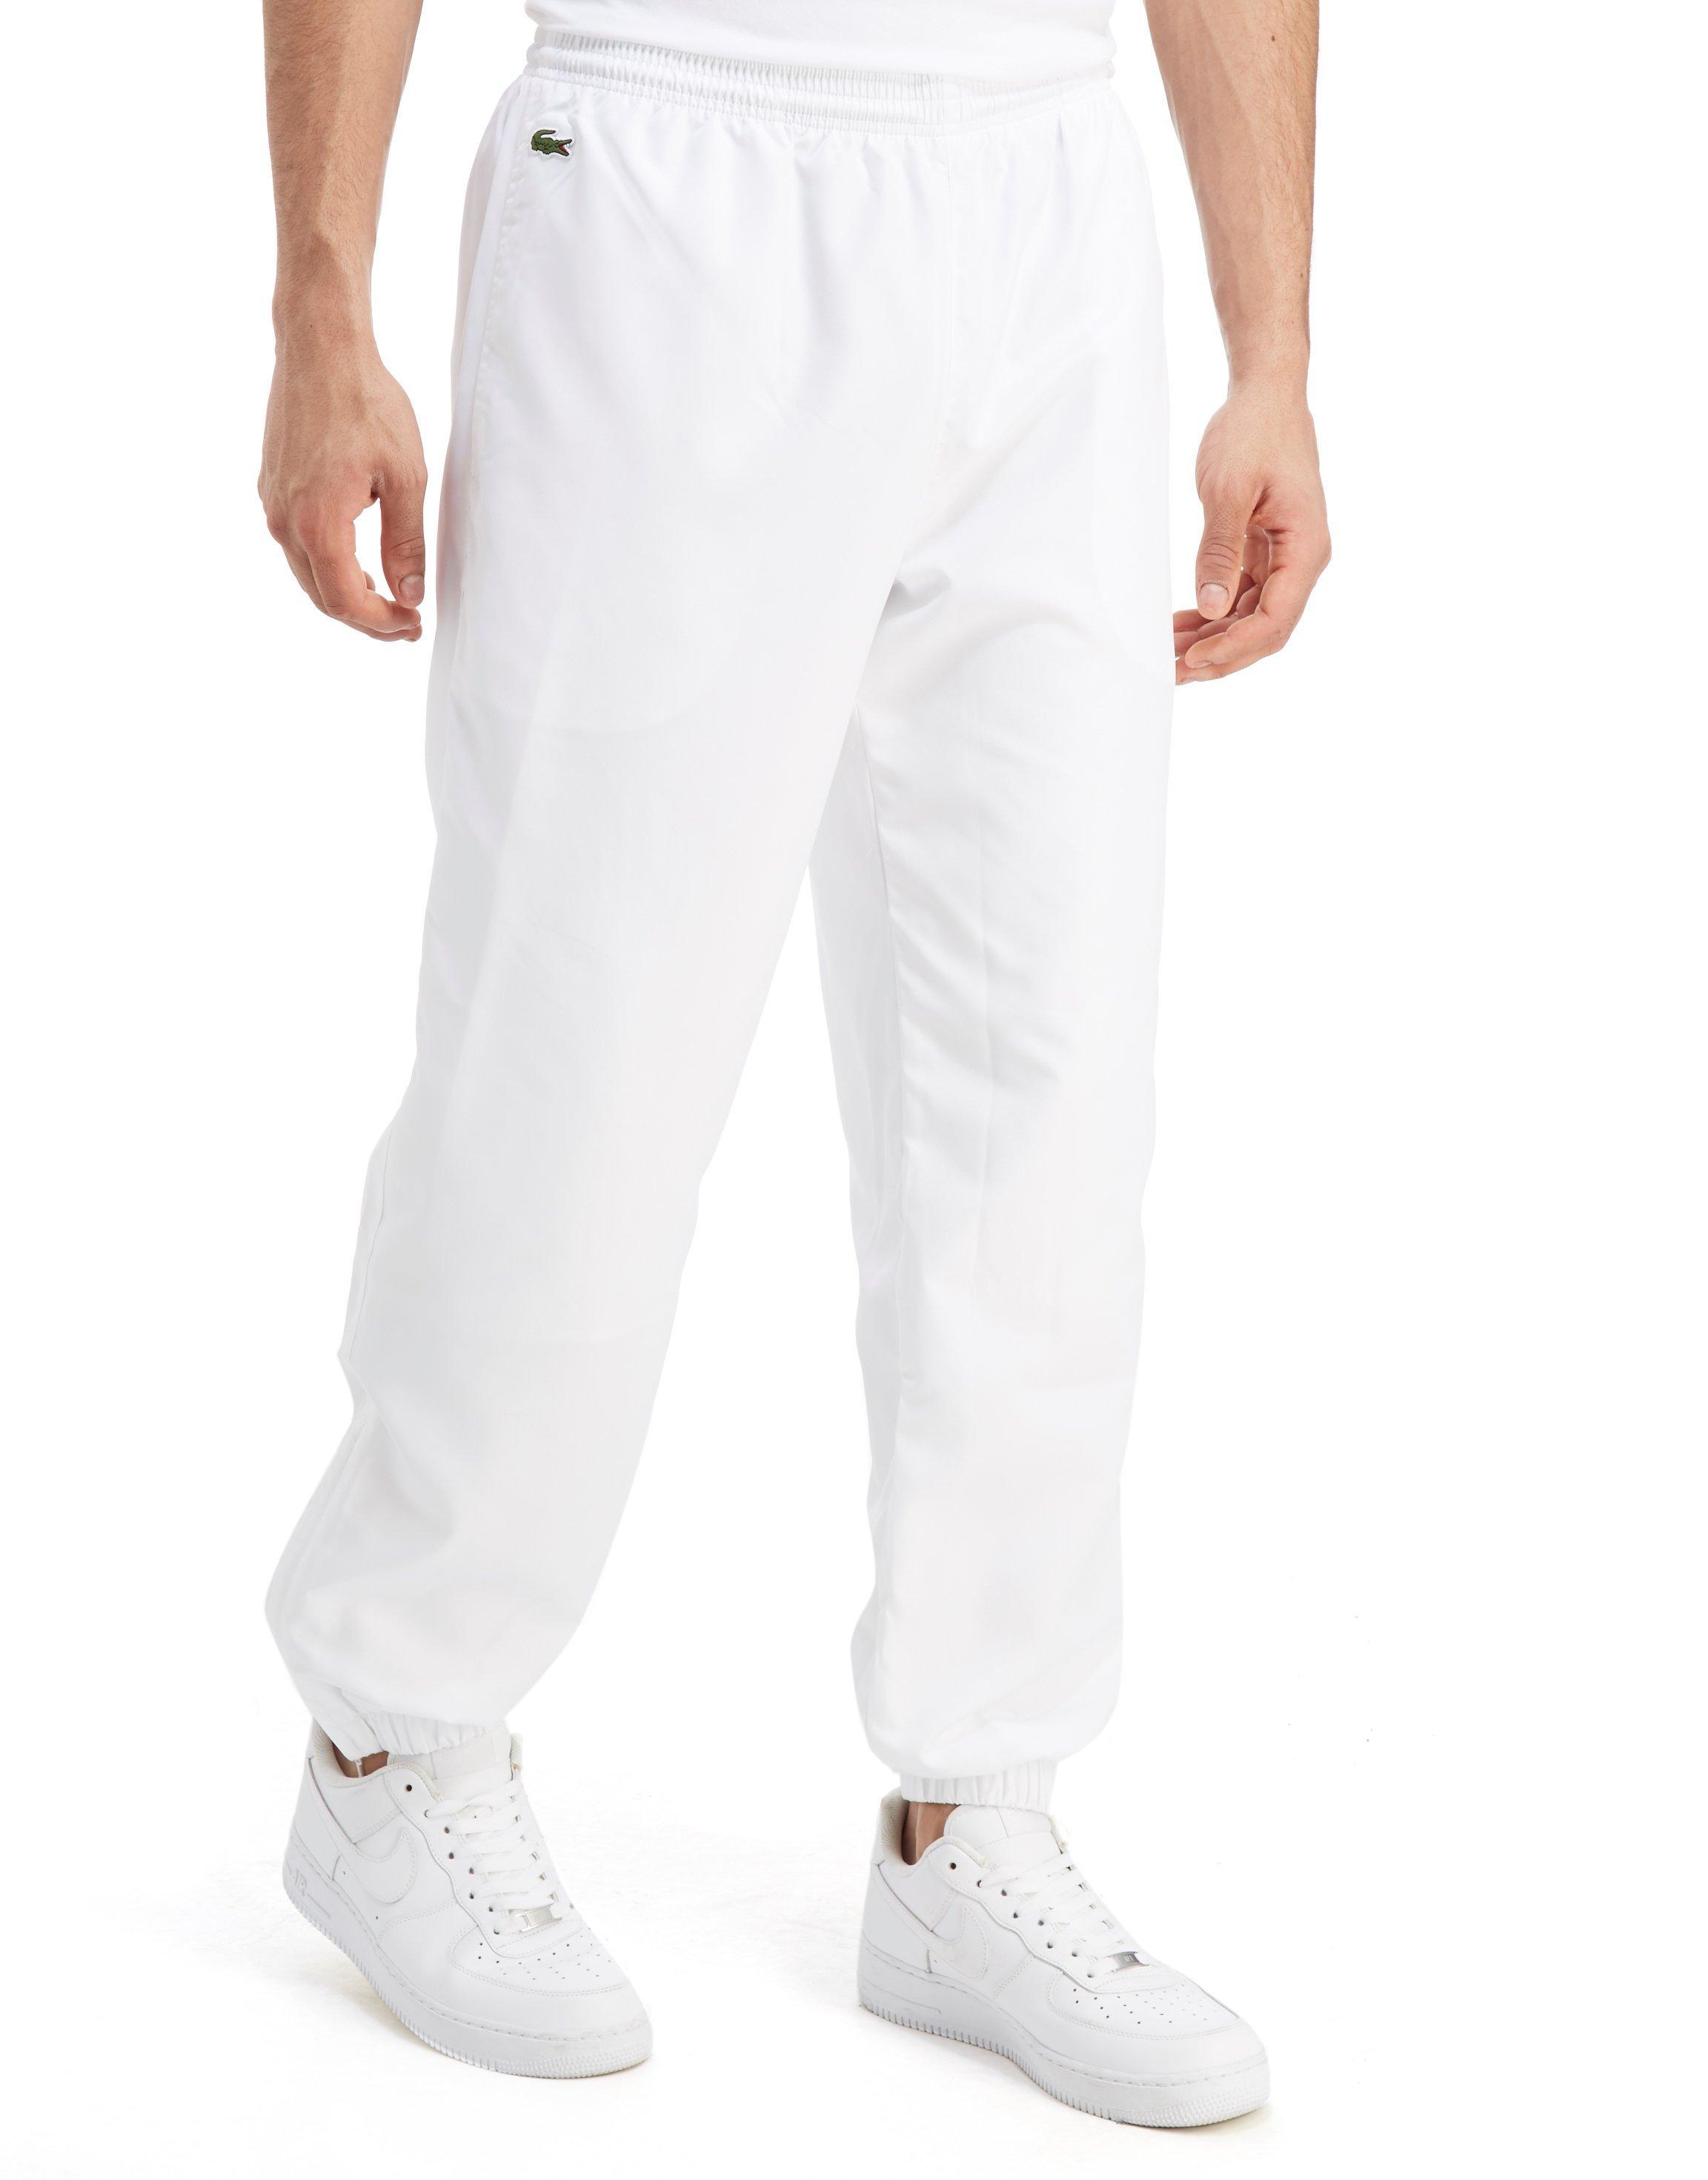 Lacoste Synthetic Guppy Track Pants in White for Men - Lyst